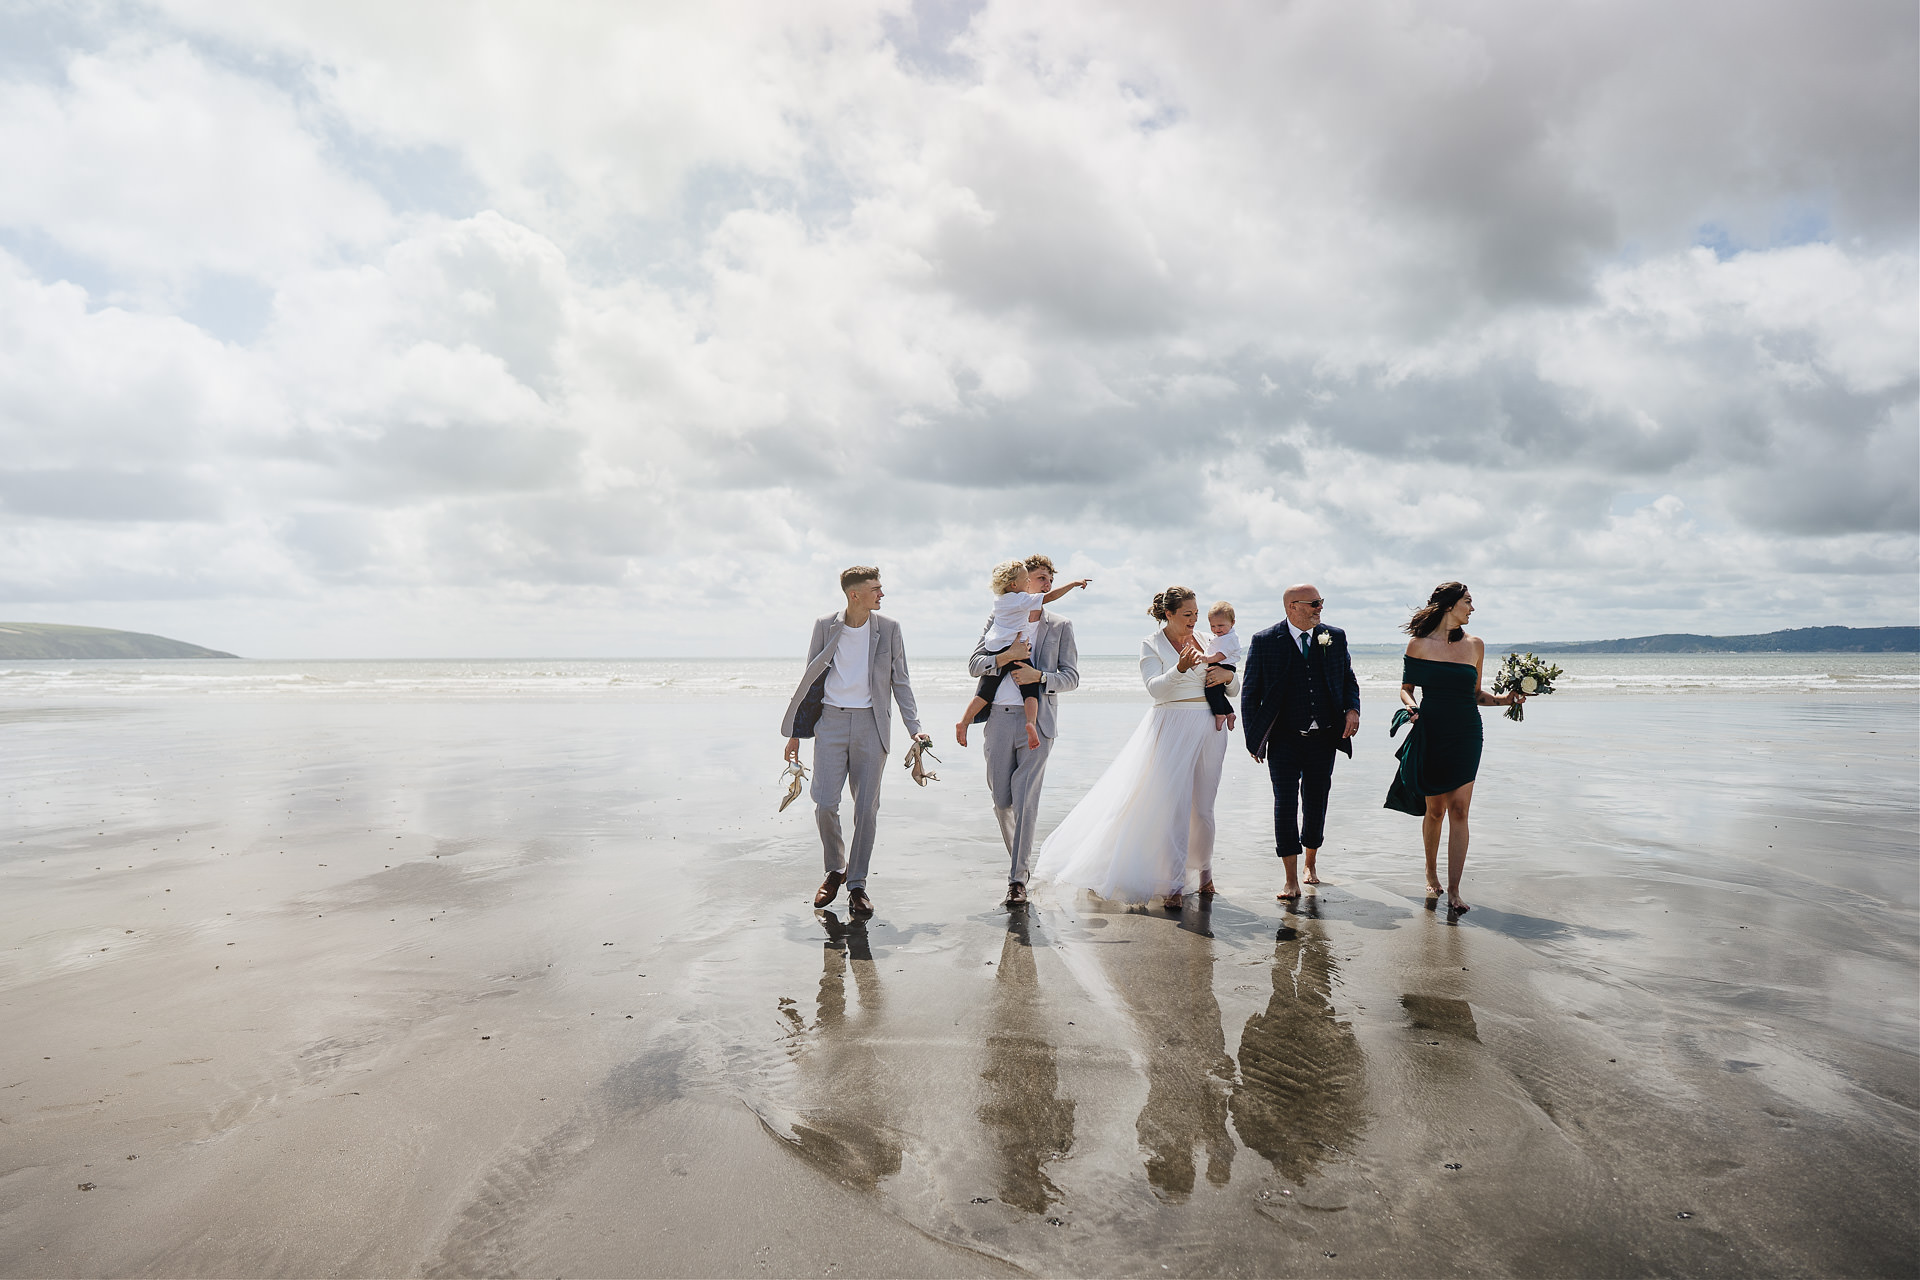 A bride and groom and family walking across a beach together